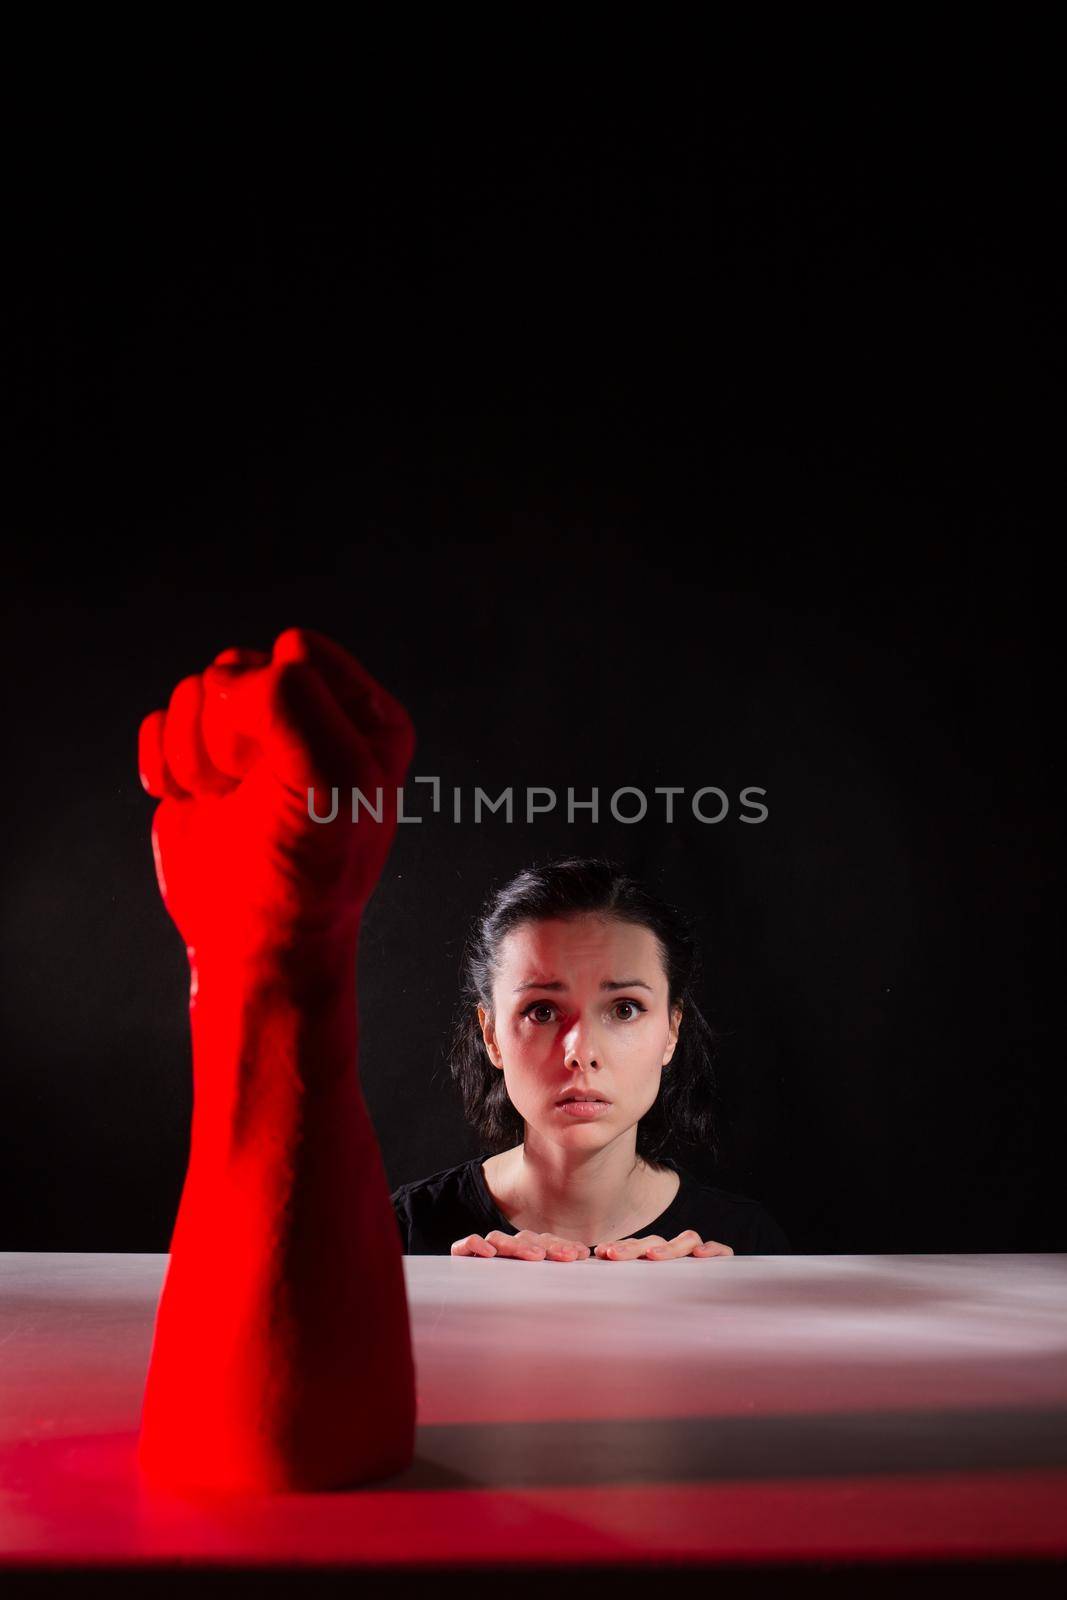 woman afraid of red hand, symbol of dictatorship, black background. High quality photo